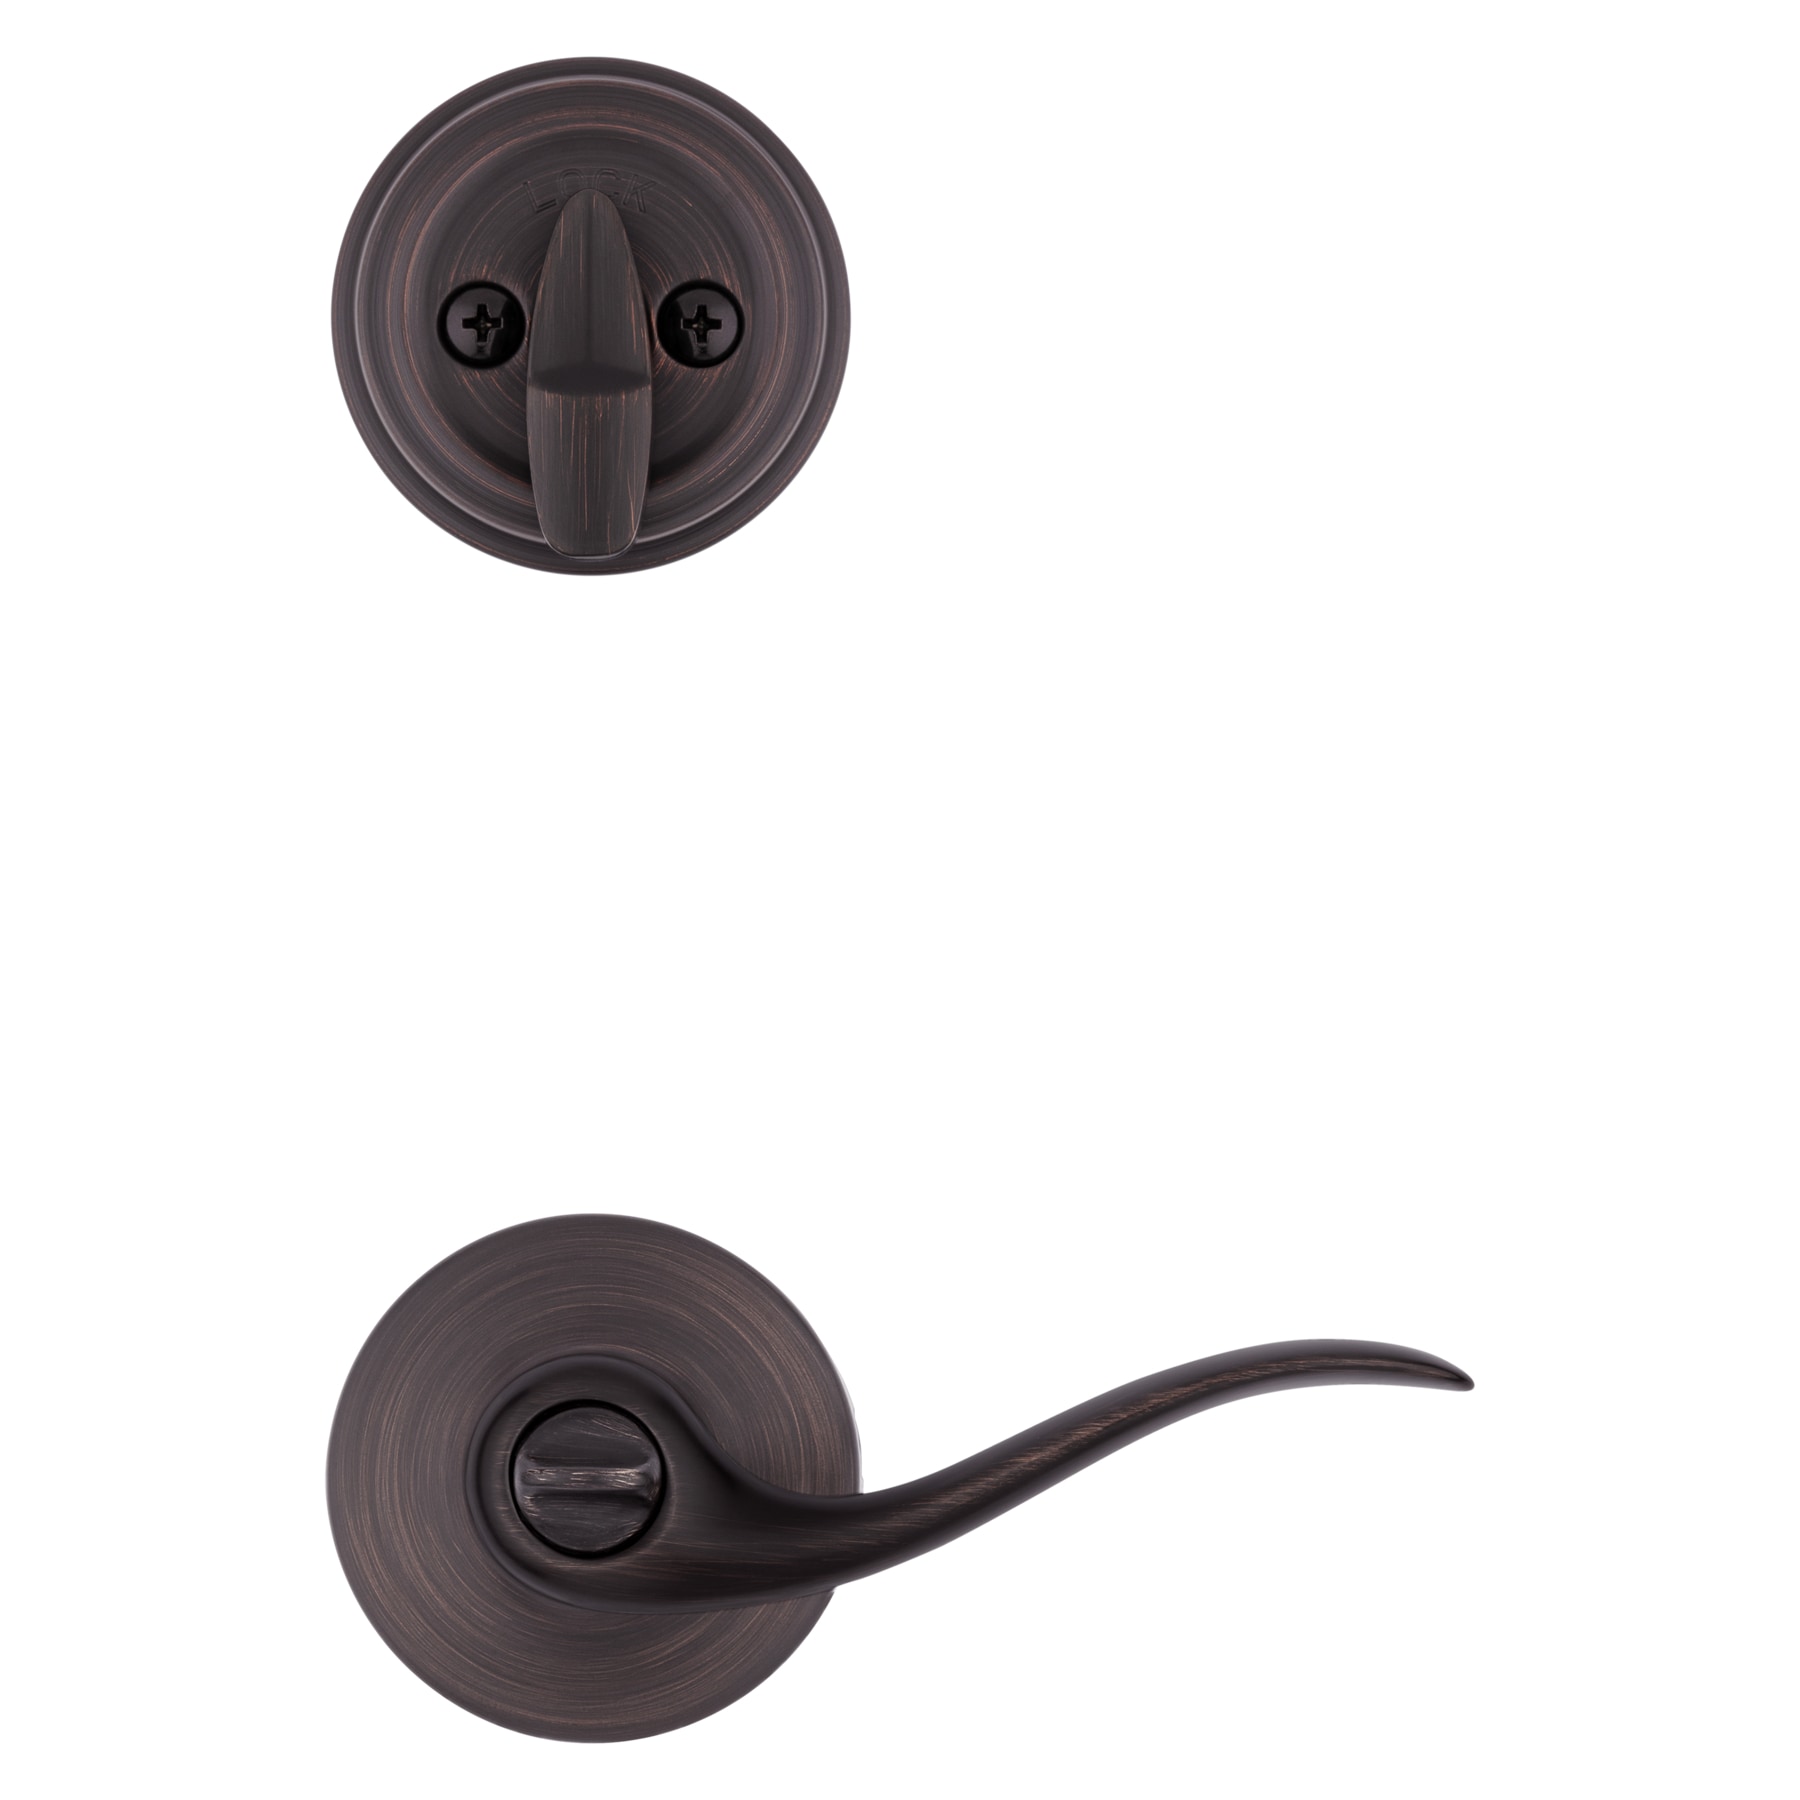 Kwikset 991 Tustin Entry Lever and Single Cylinder Deadbolt Combo Pack featuring SmartKey in Venetian Bronze (99910-041) - 1